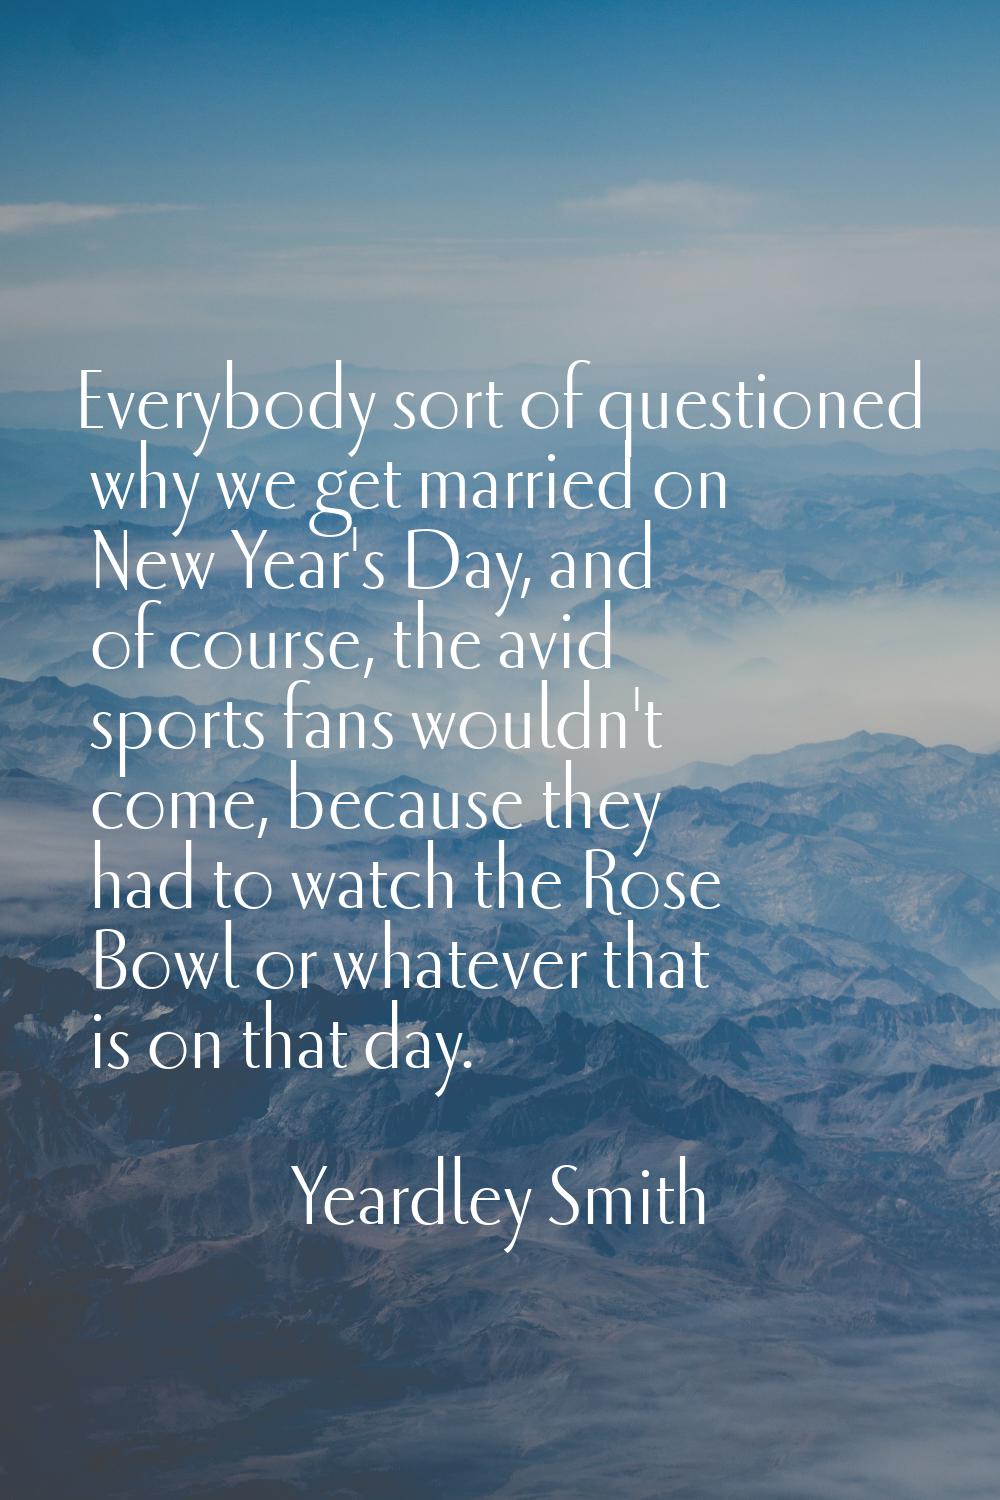 Everybody sort of questioned why we get married on New Year's Day, and of course, the avid sports f